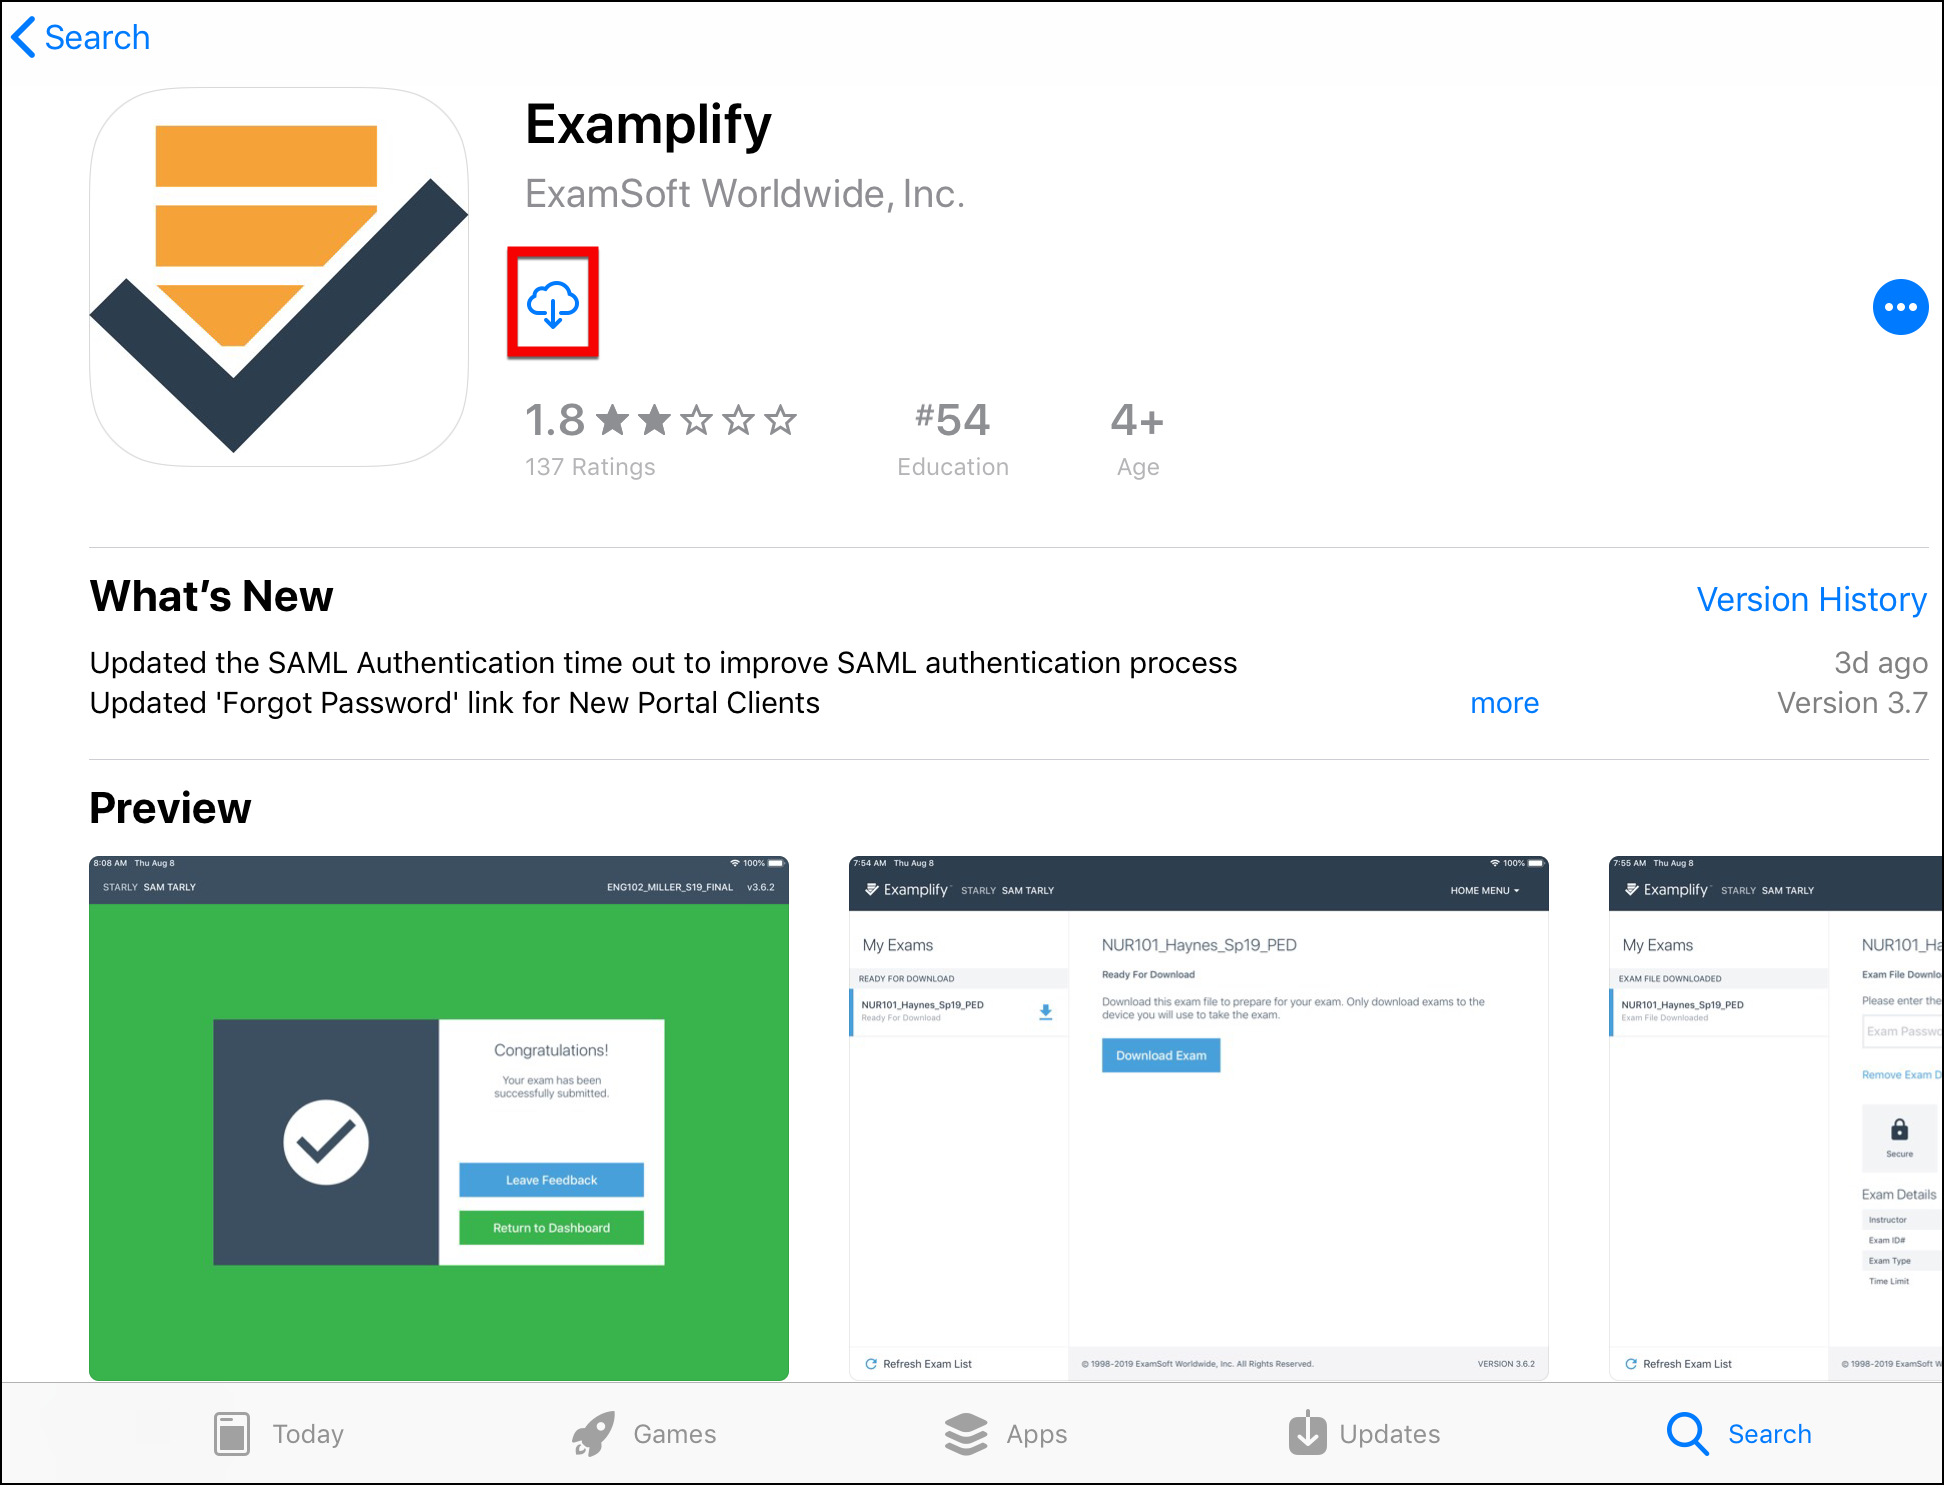 Examplify software download free download full version of windows 10